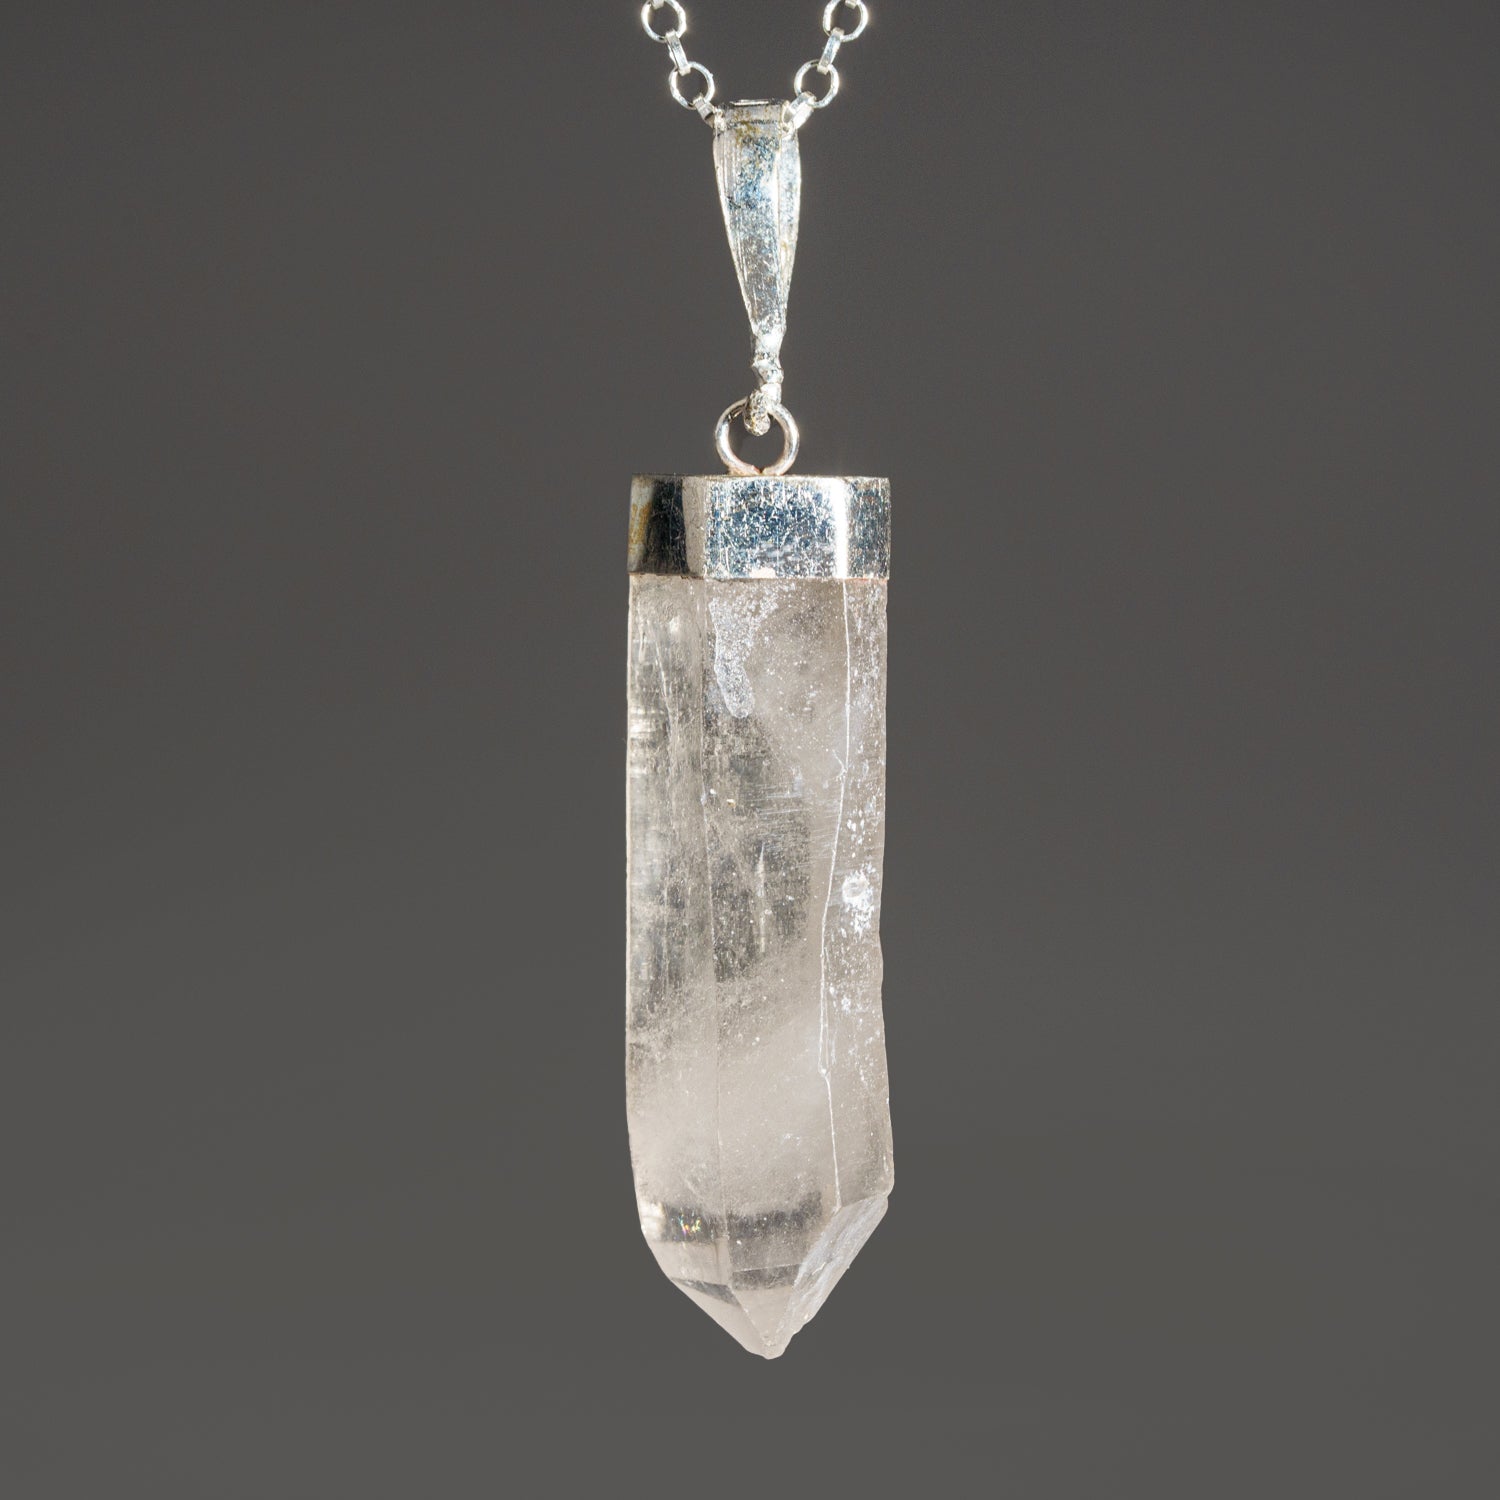 Genuine Clear Quartz Crystal Pendant (6-9 grams) with 18" Sterling Silver Chain